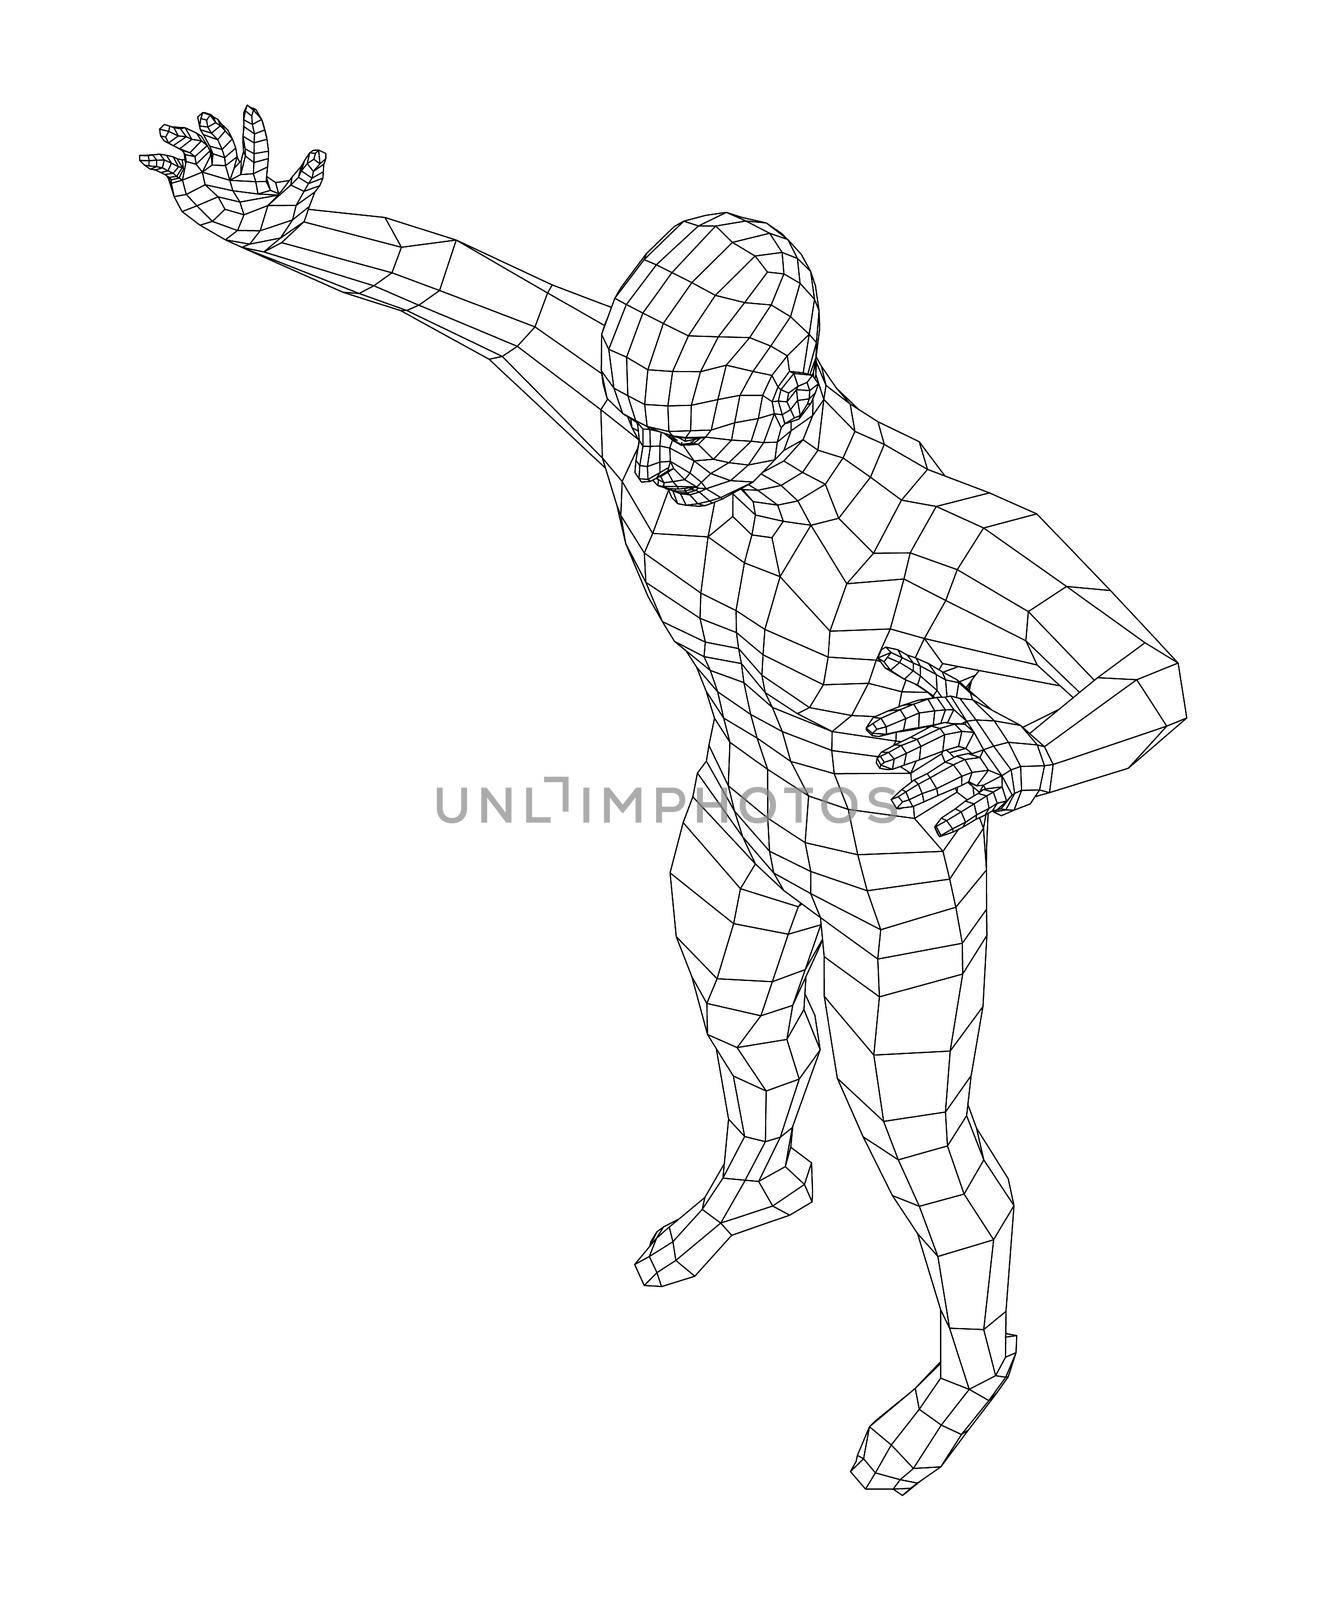 Wireframe jumping man. 3d illustration by cherezoff